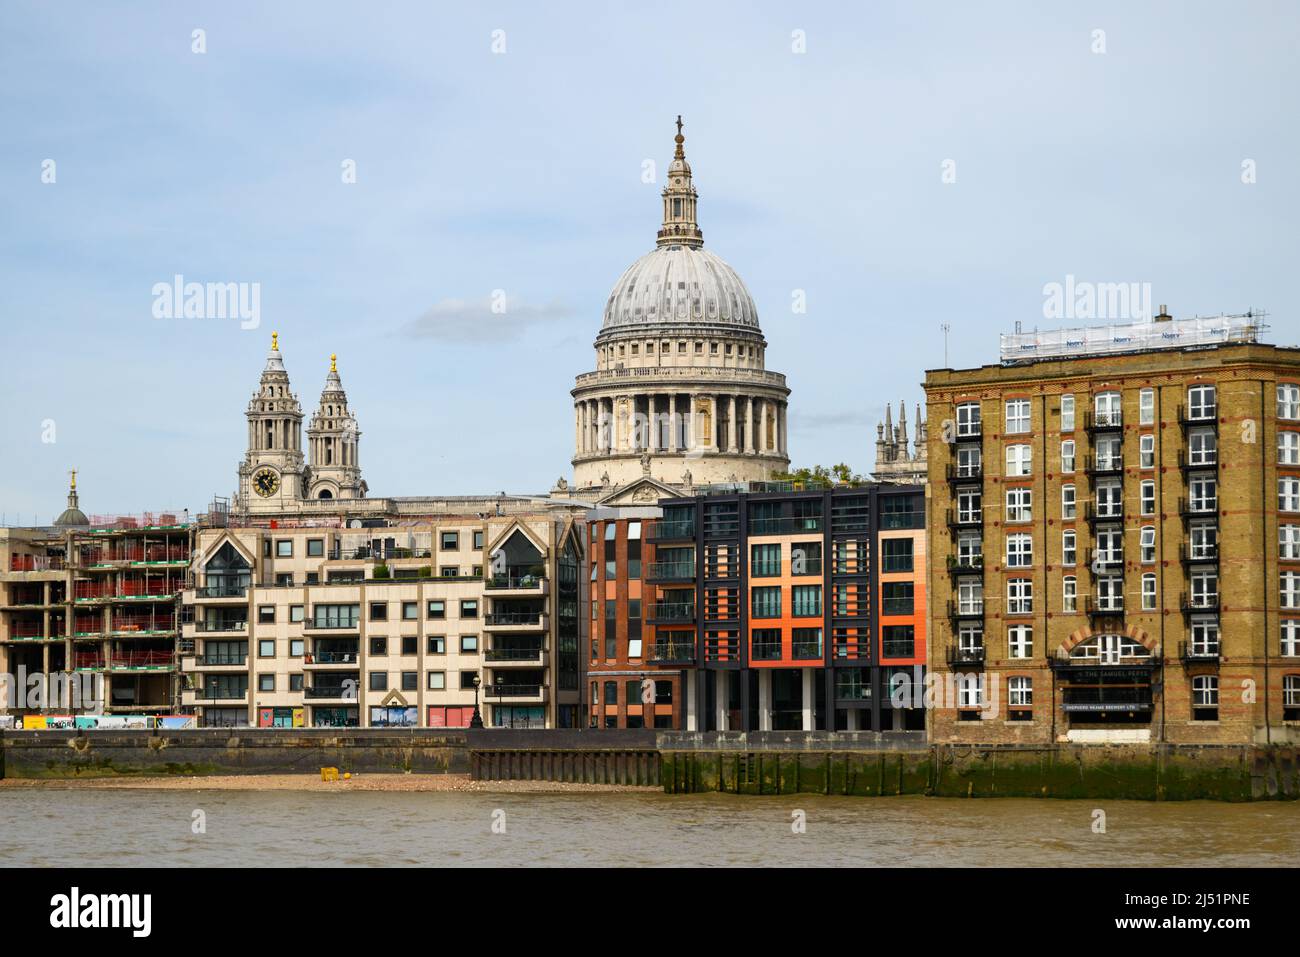 St Pauls Cathedral dome above offices and apartment buildings, view from South Bank, London, UK, April Stock Photo